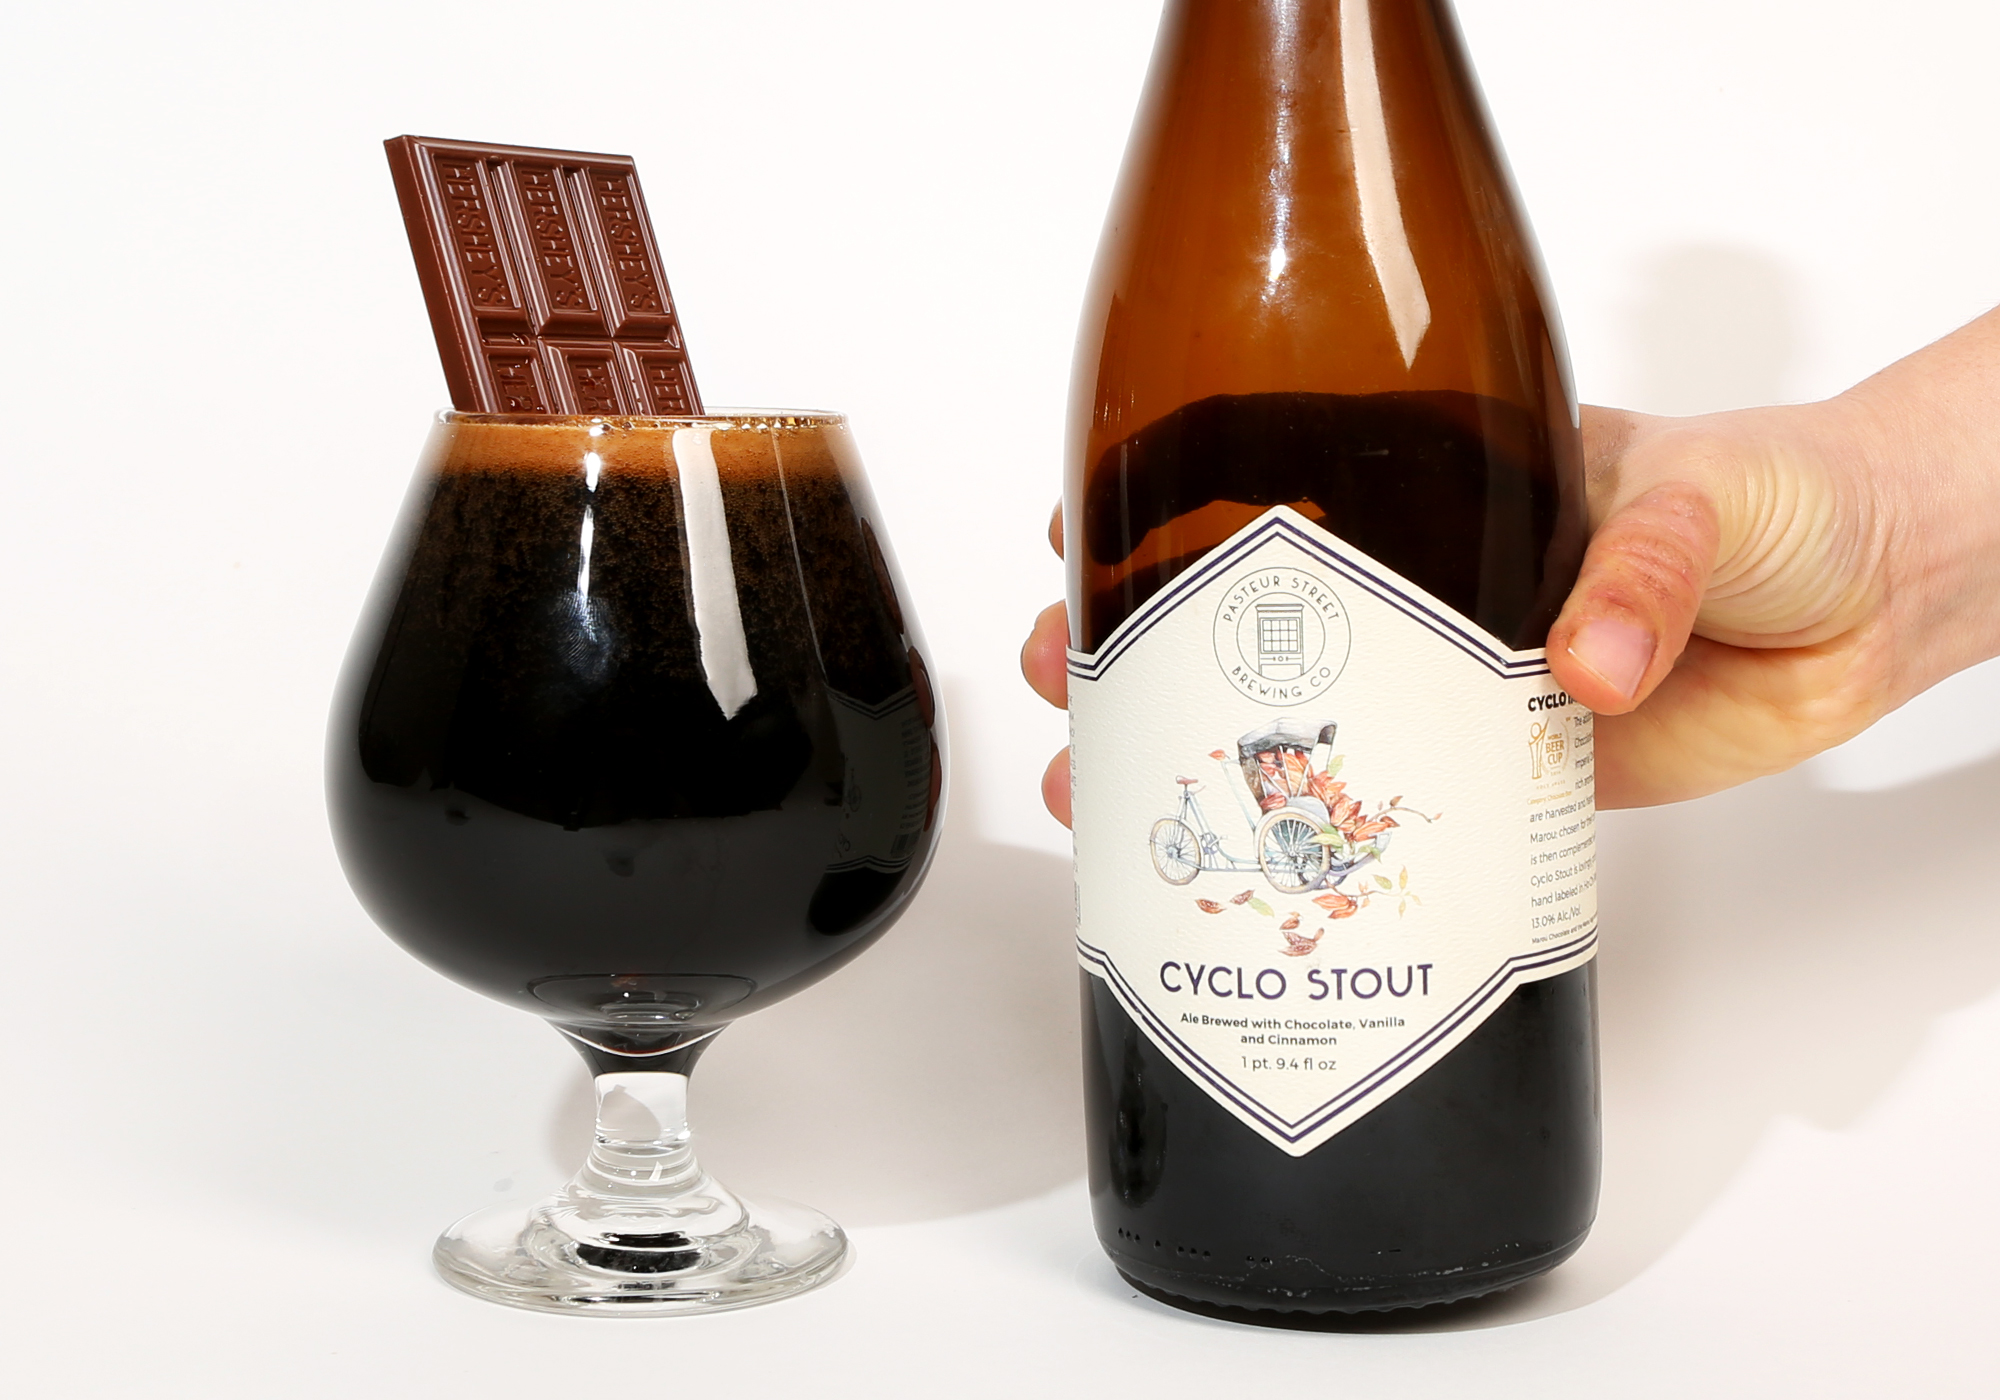 cyclo stout from pasteur street brewing